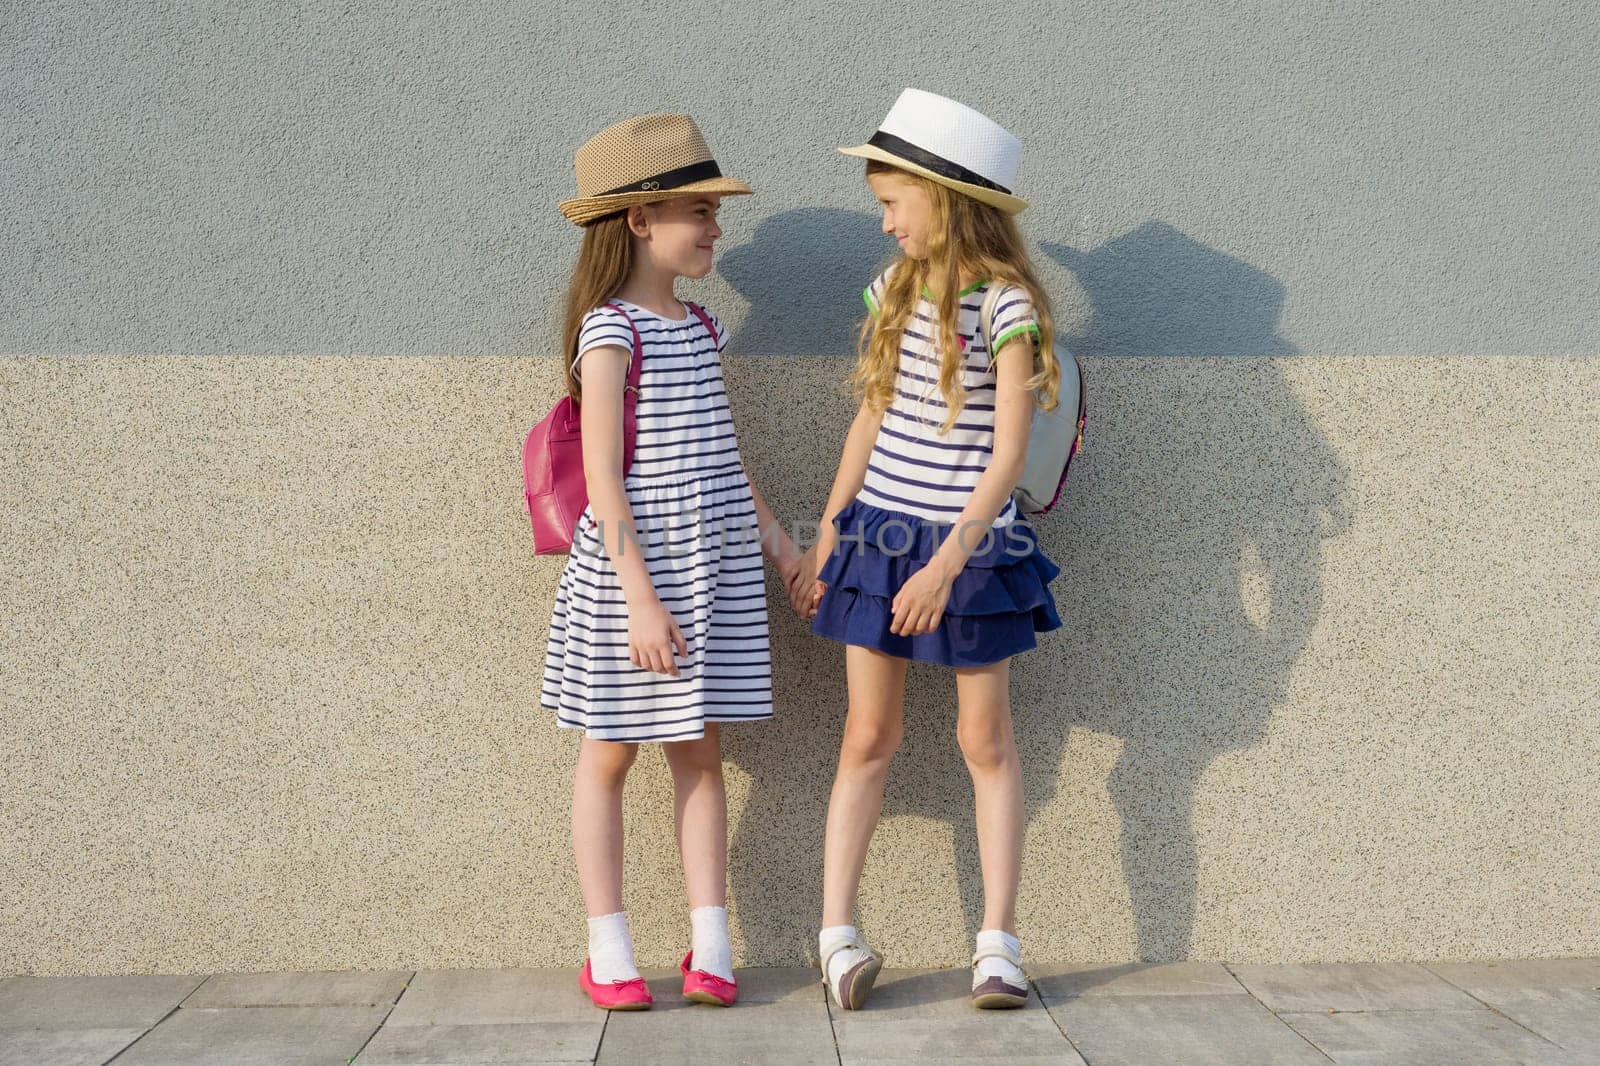 Outdoor summer portrait of two happy girl friends 7,8 years in profile talking and laughing. Girls in striped dresses, hats with backpack, background gray wall